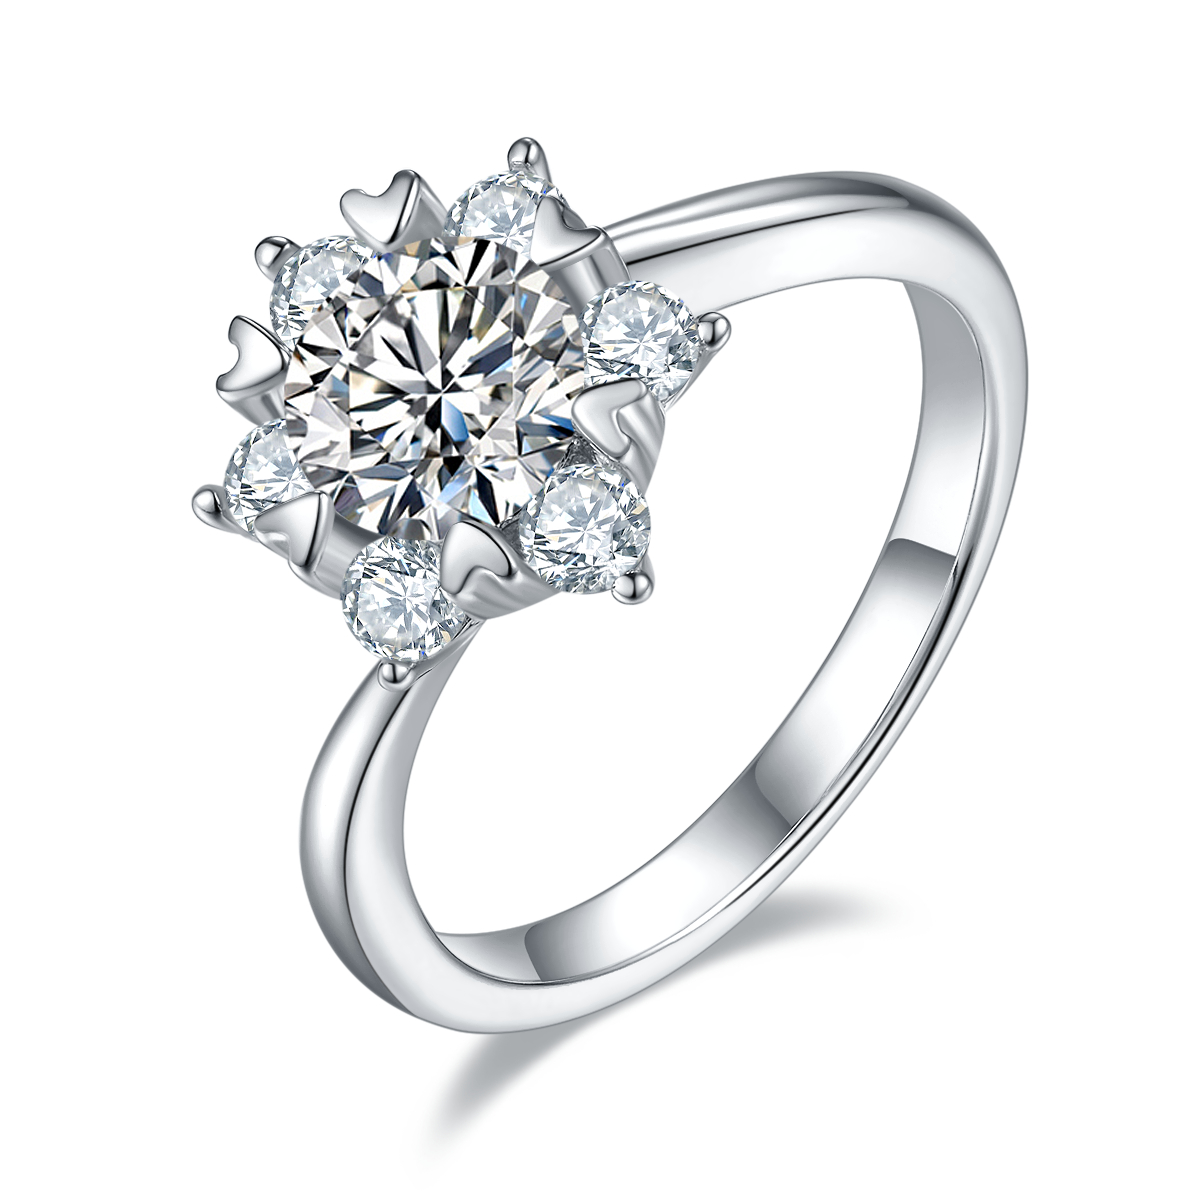 DEDEJILL Starry Flower Sterling Silver Plated White Gold Round Cut Moissanite Ring-1ct D Grade